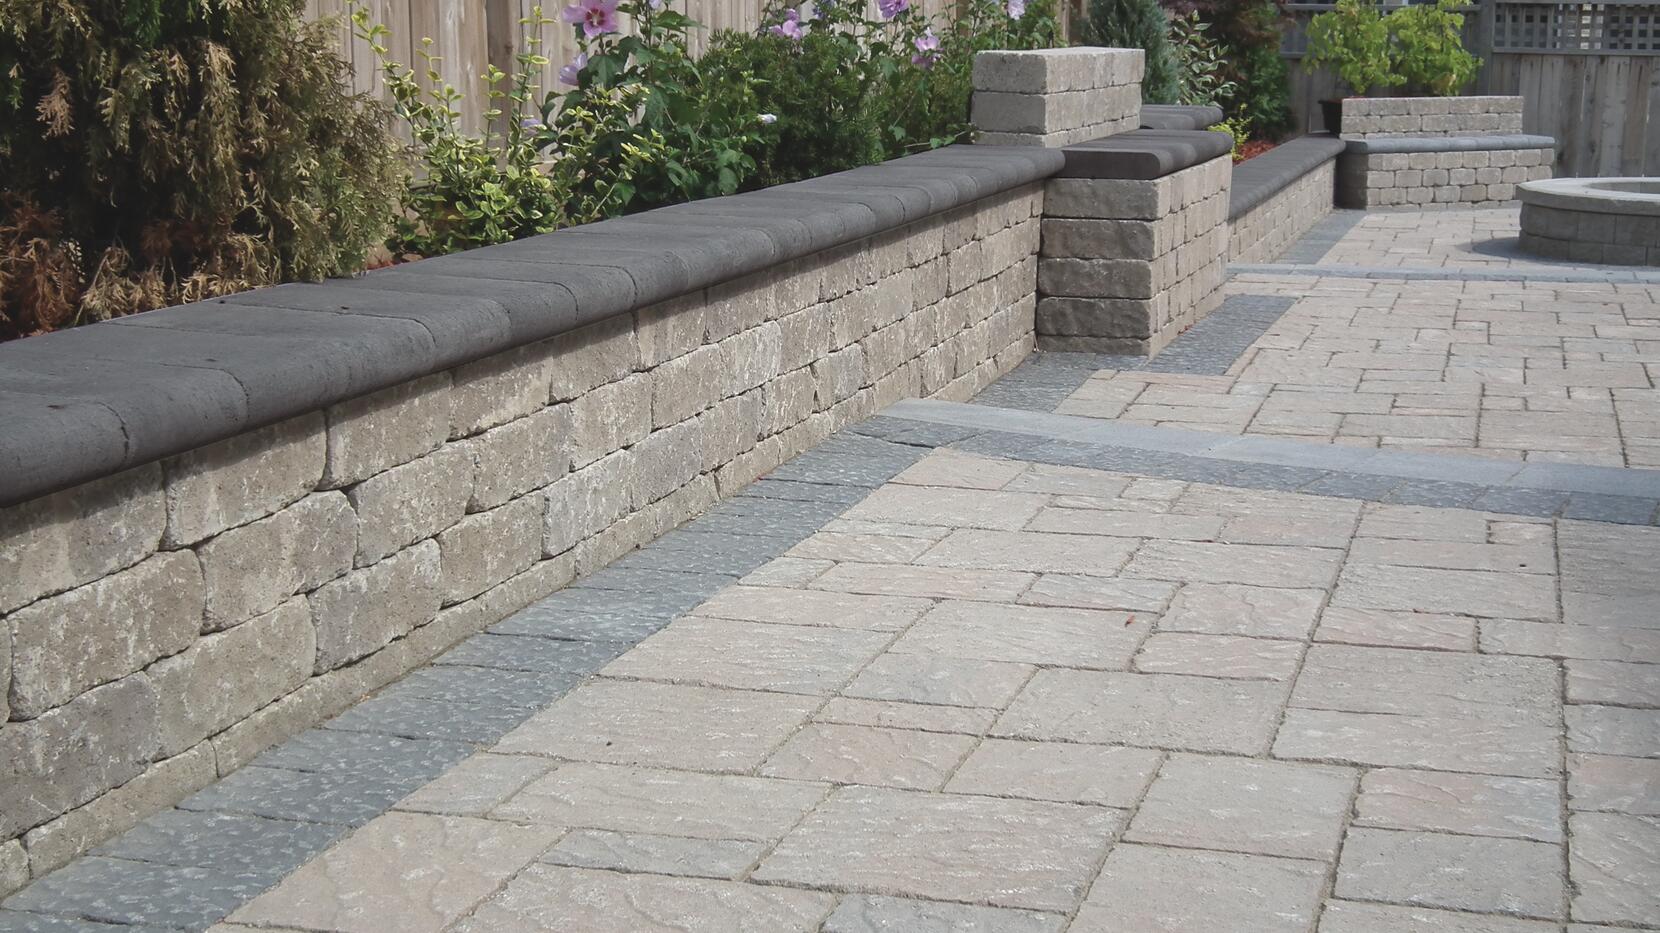 Wall: Castlerok 2, Sandstone with Cassina, Onyx coping